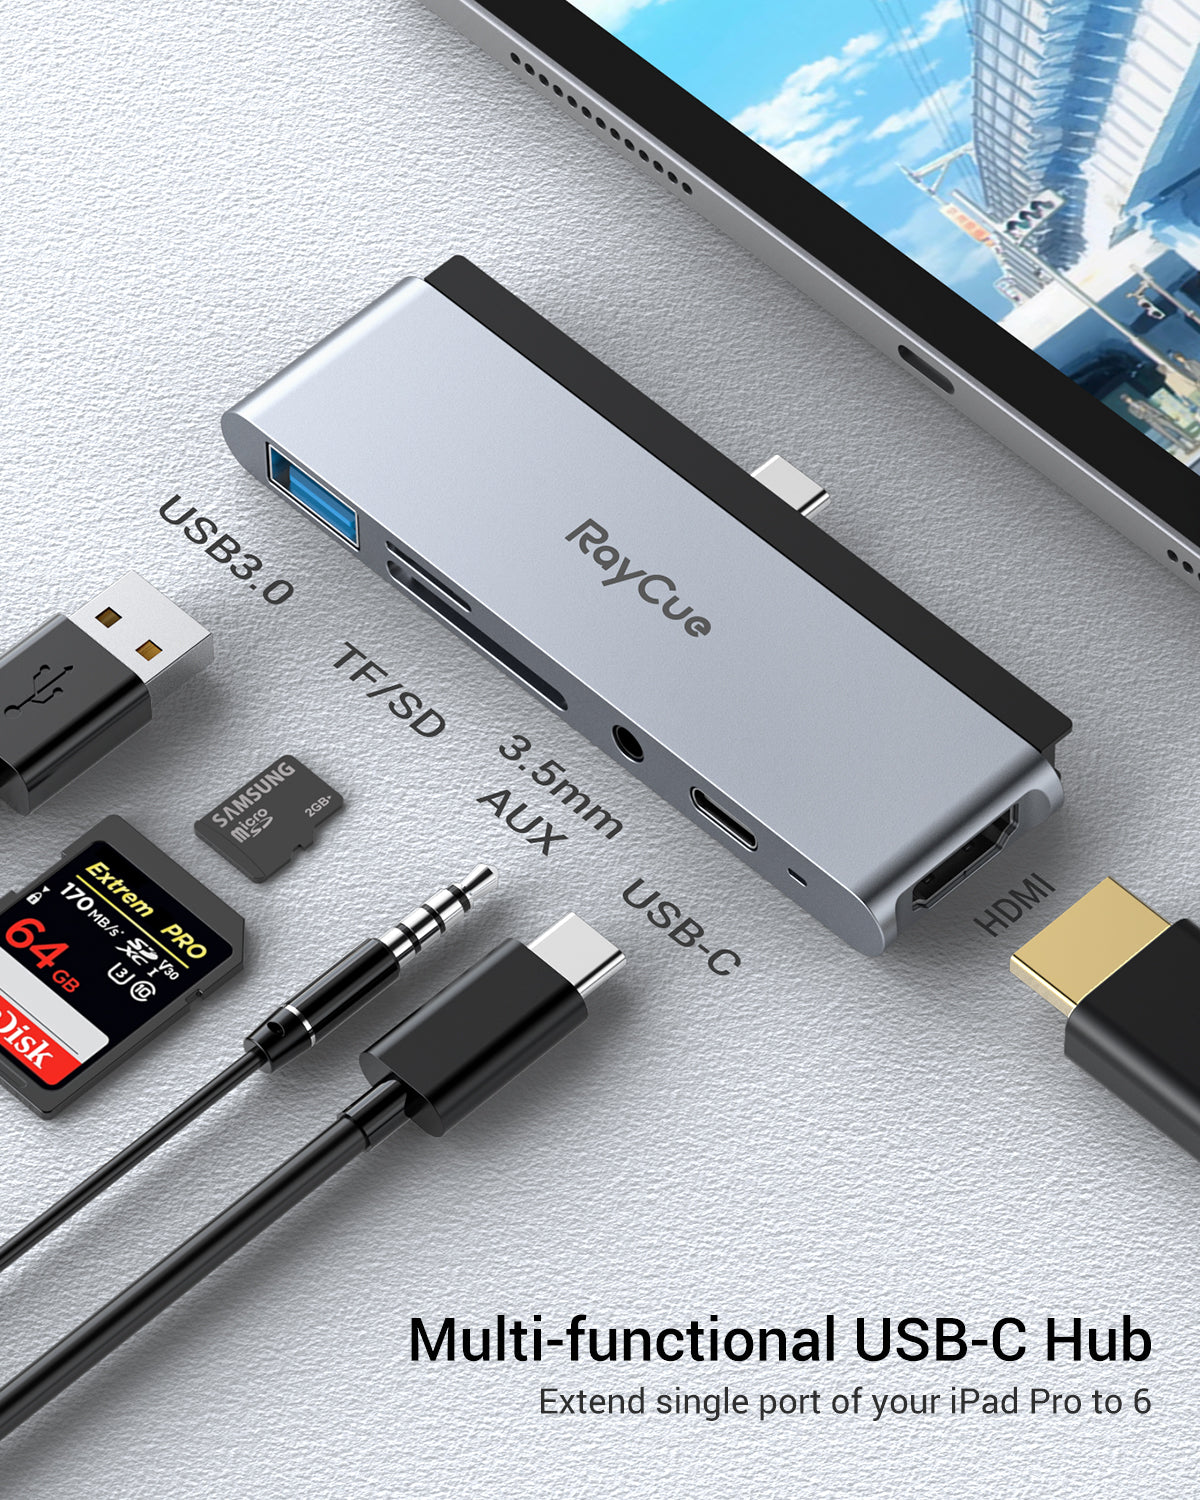 RayCue ExpandPro Sole 6-in-1 USB-C Hub for iPad Pro 2018/2020/2021